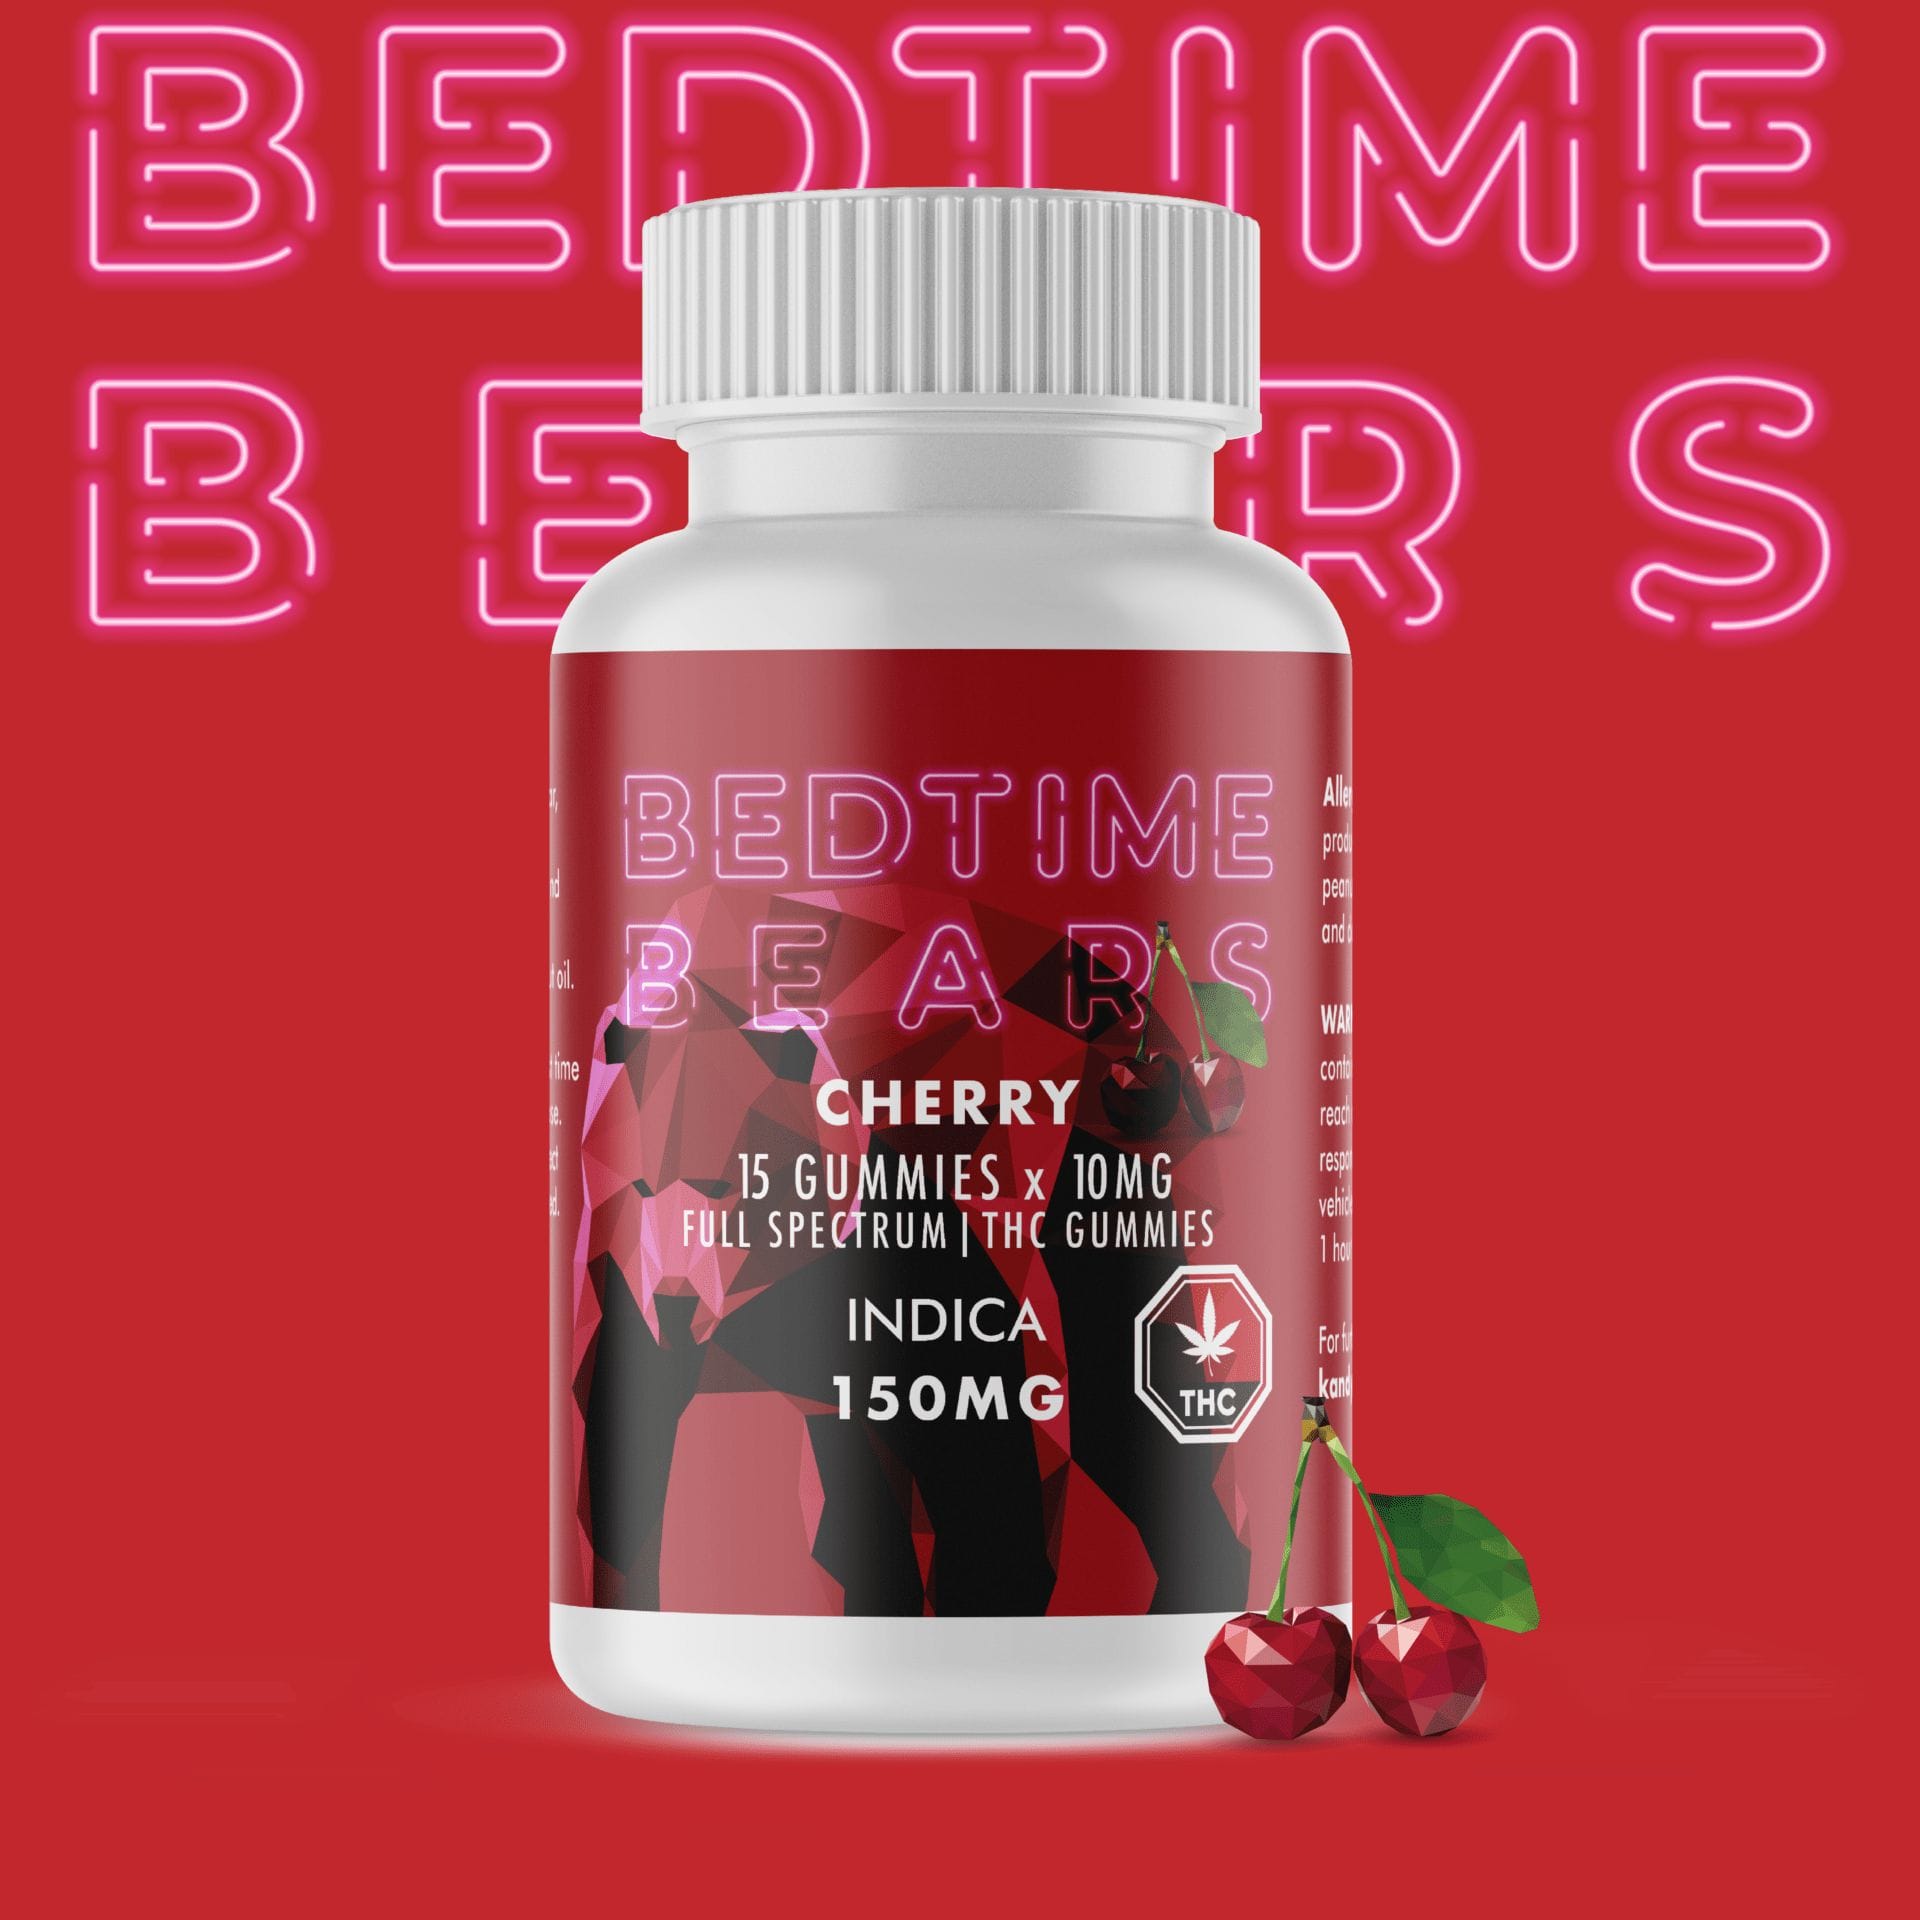 Bedtime Cherry 150mg Hover